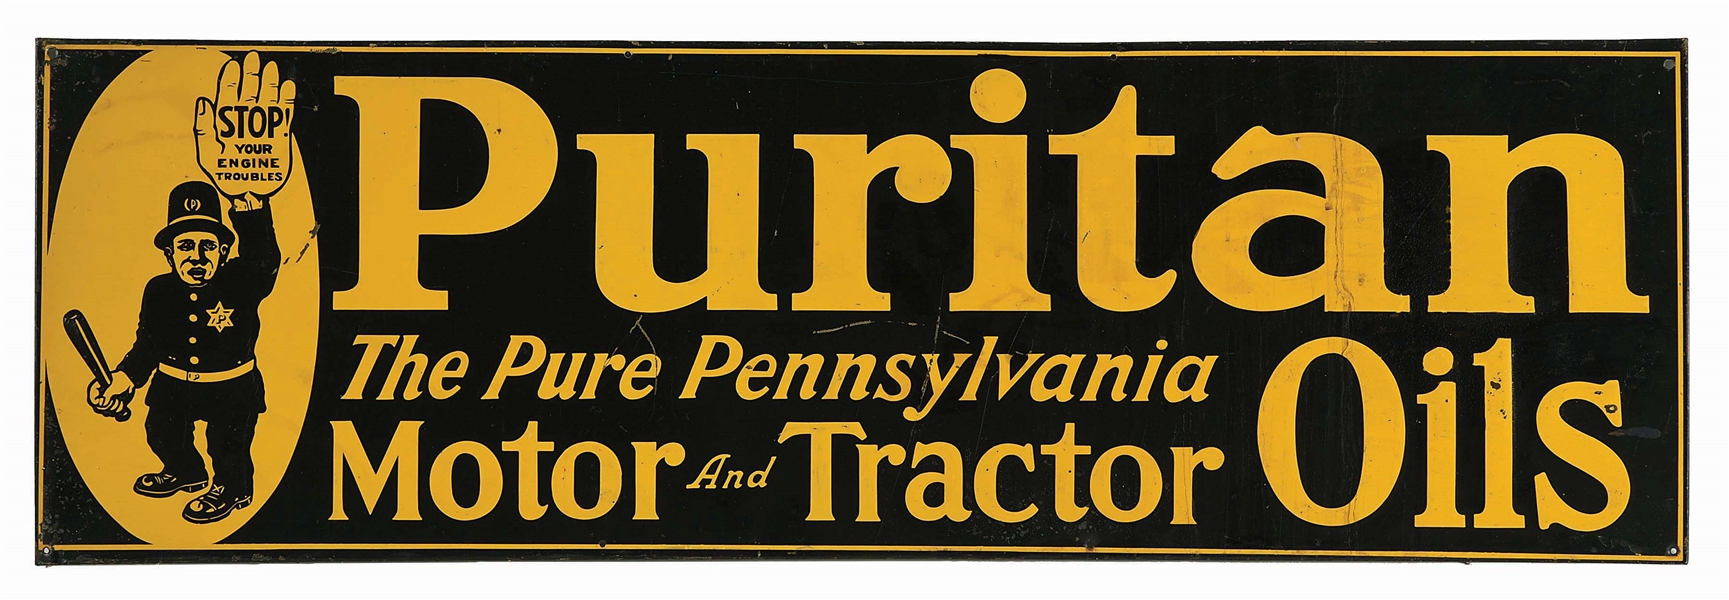 PURITAN MOTOR & TRACTOR OILS EMBOSSED TIN SIGN W/ POLICE OFFICER GRAPHIC. 